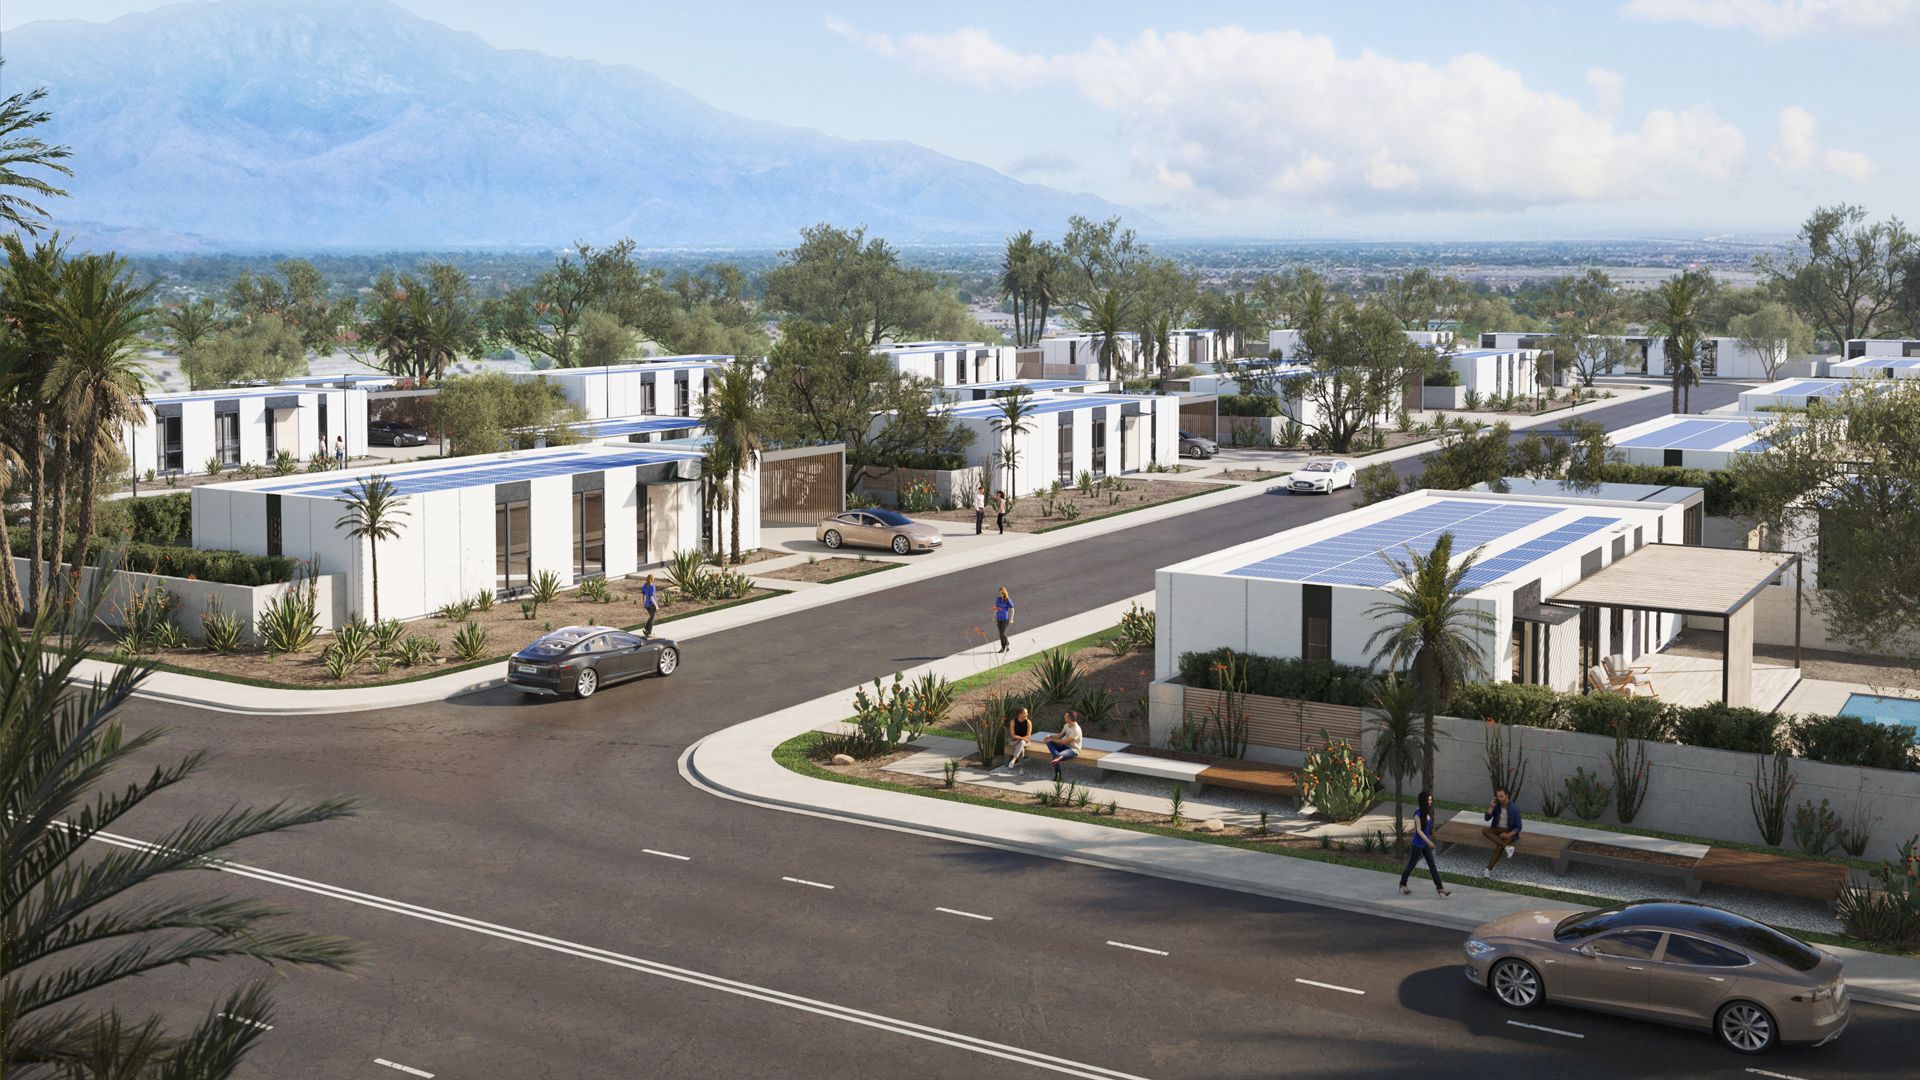 A rendering of a planned 3D printed housing community in Rancho Mirage, California. 